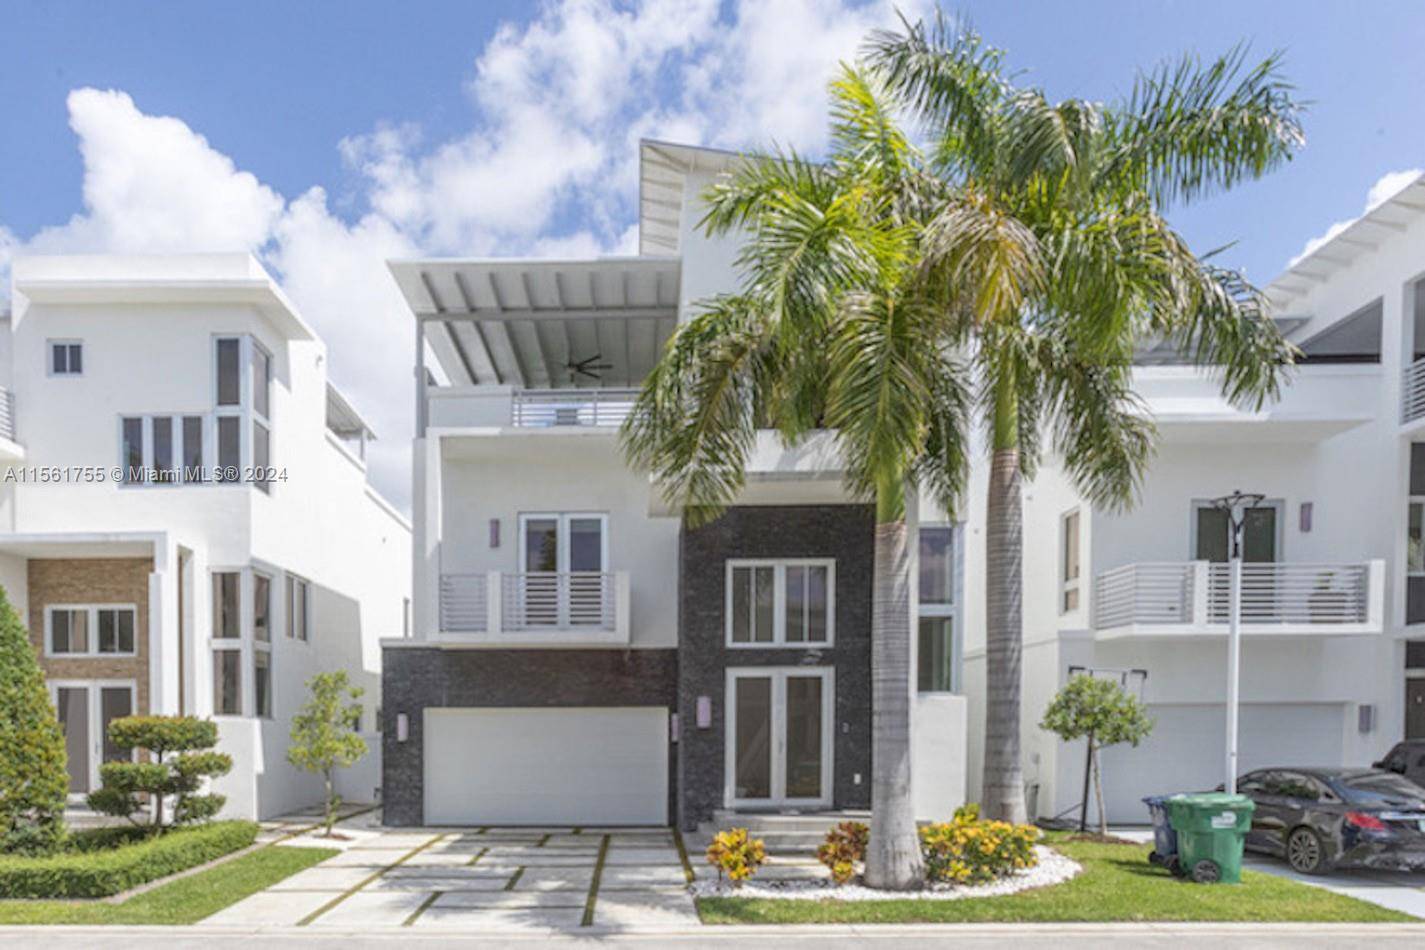 This is a beautiful, elegant, modern style home in the exclusive Community Oasis Park Square.